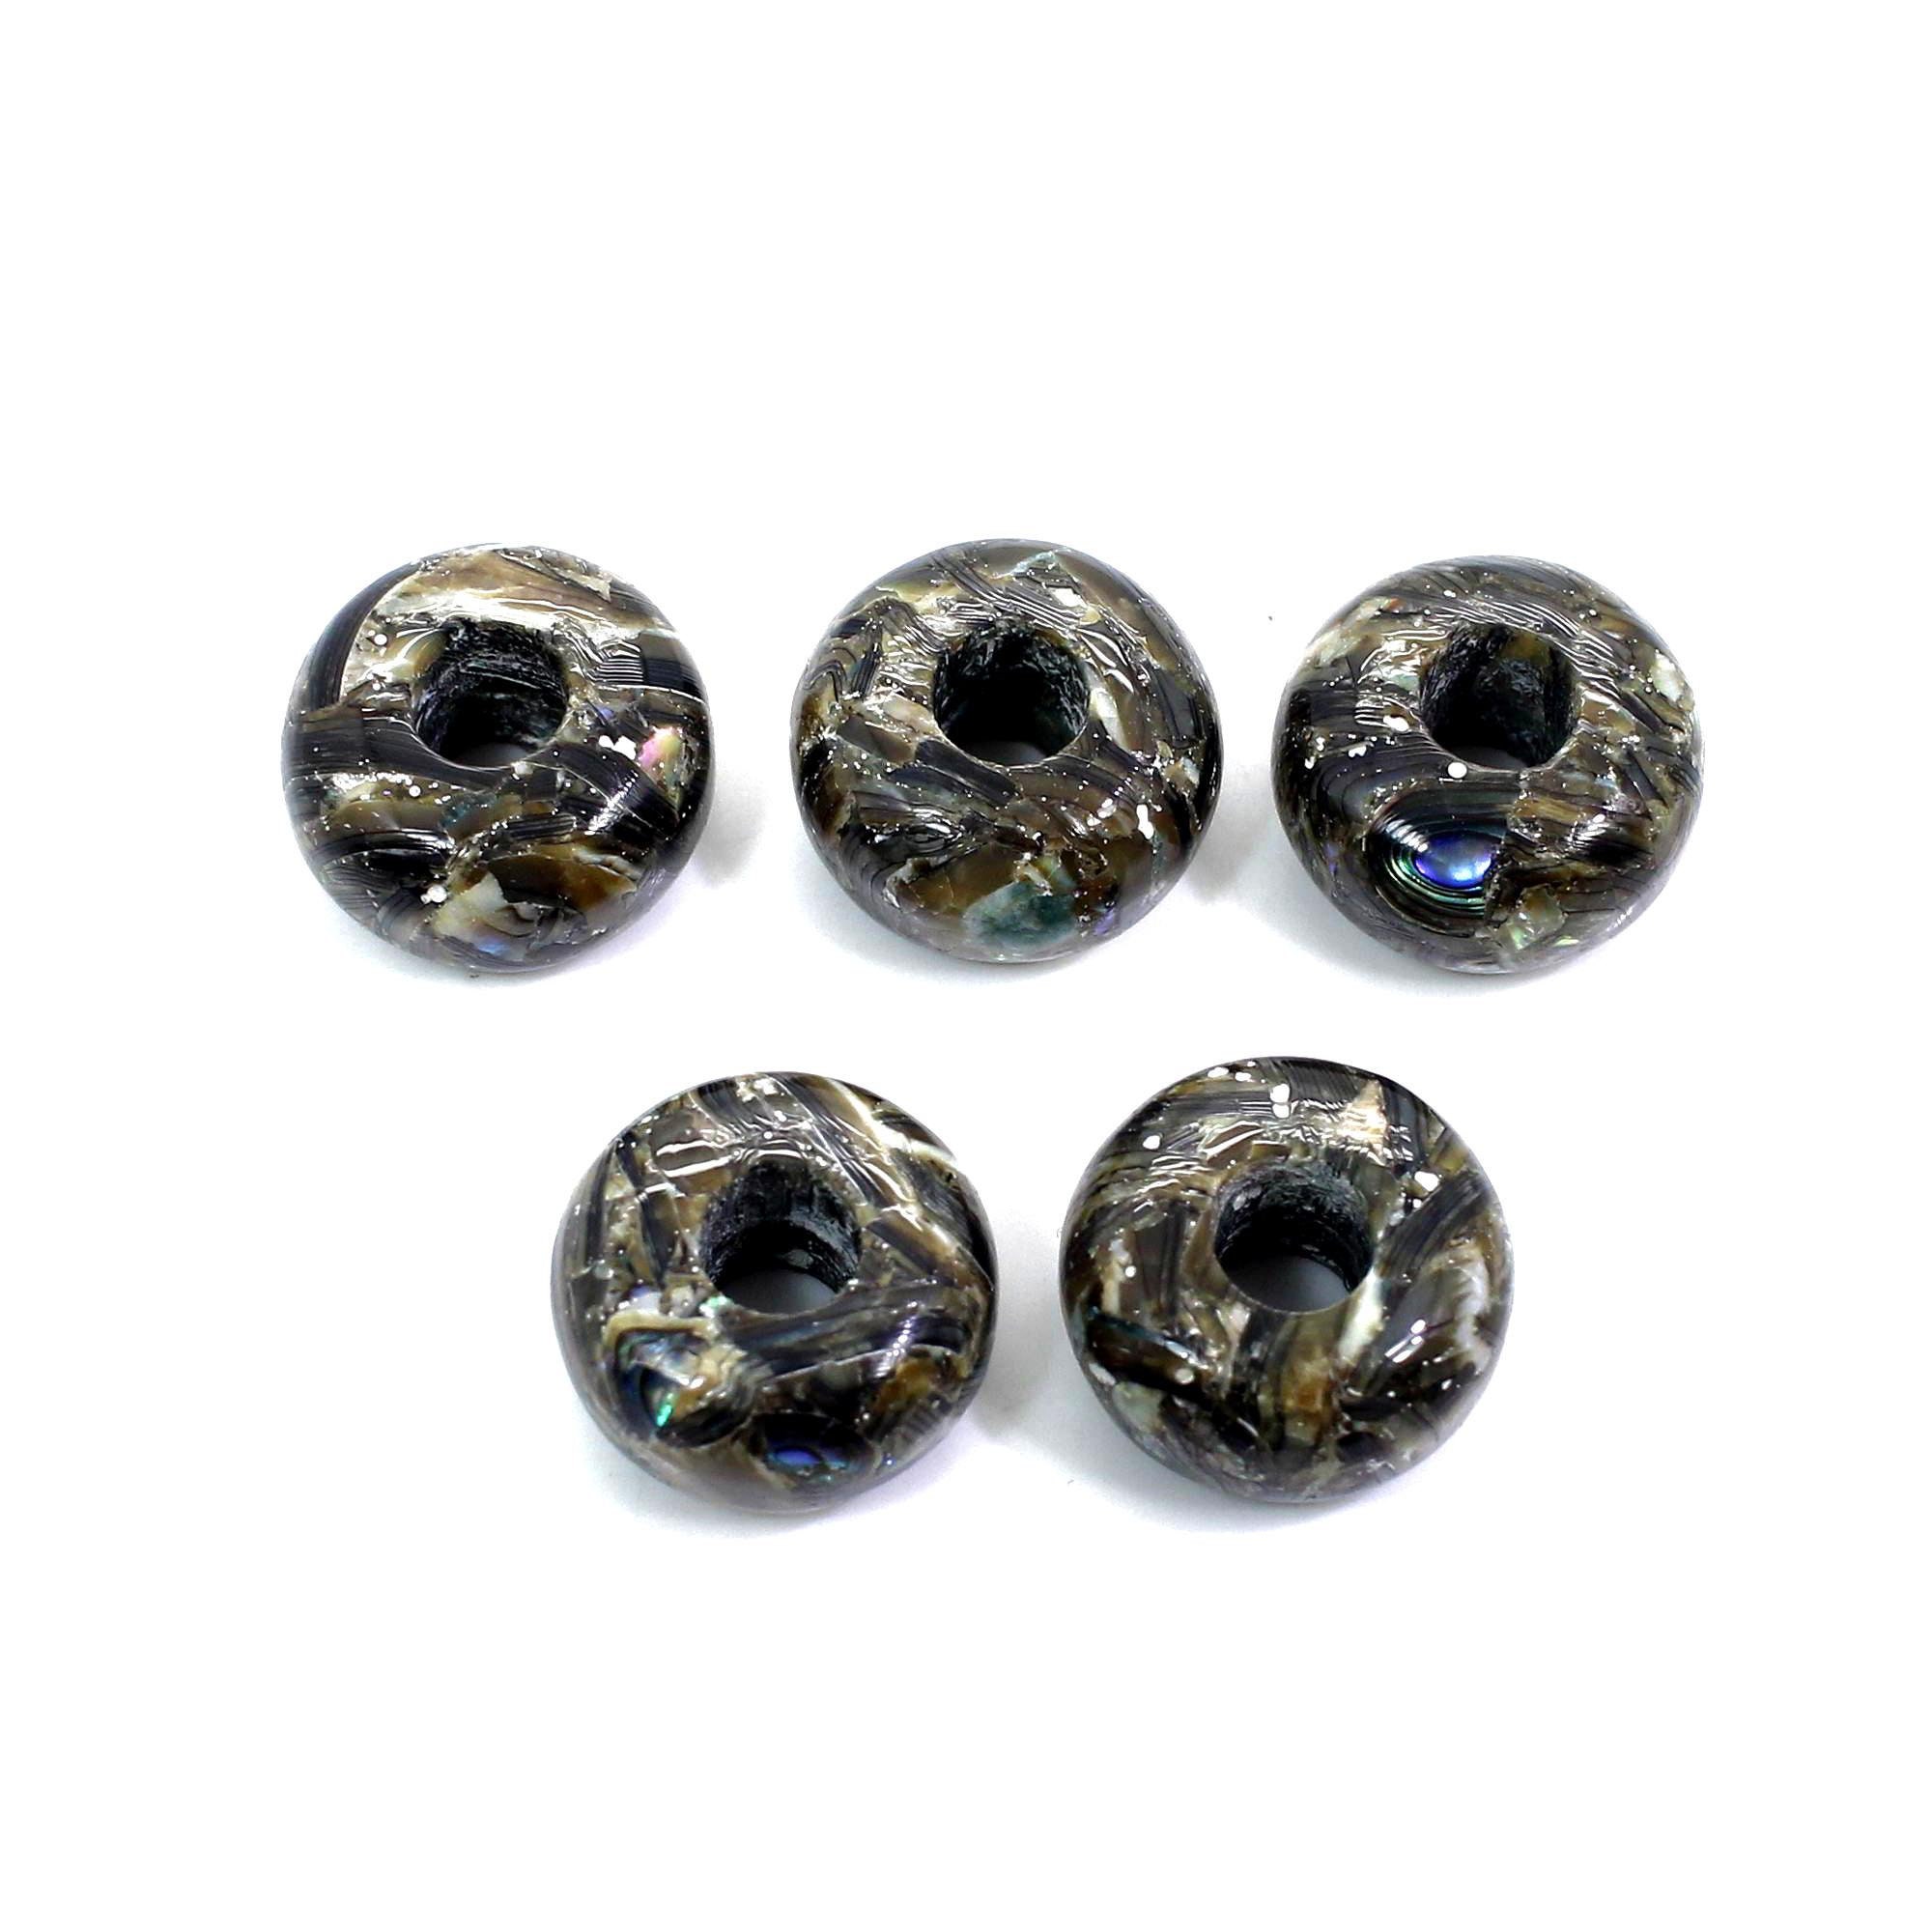 5mm Hole Round Glass Beads 10 Pack Large Hole Bead for Macrame 16mm  Diameter 10 Colour Options 